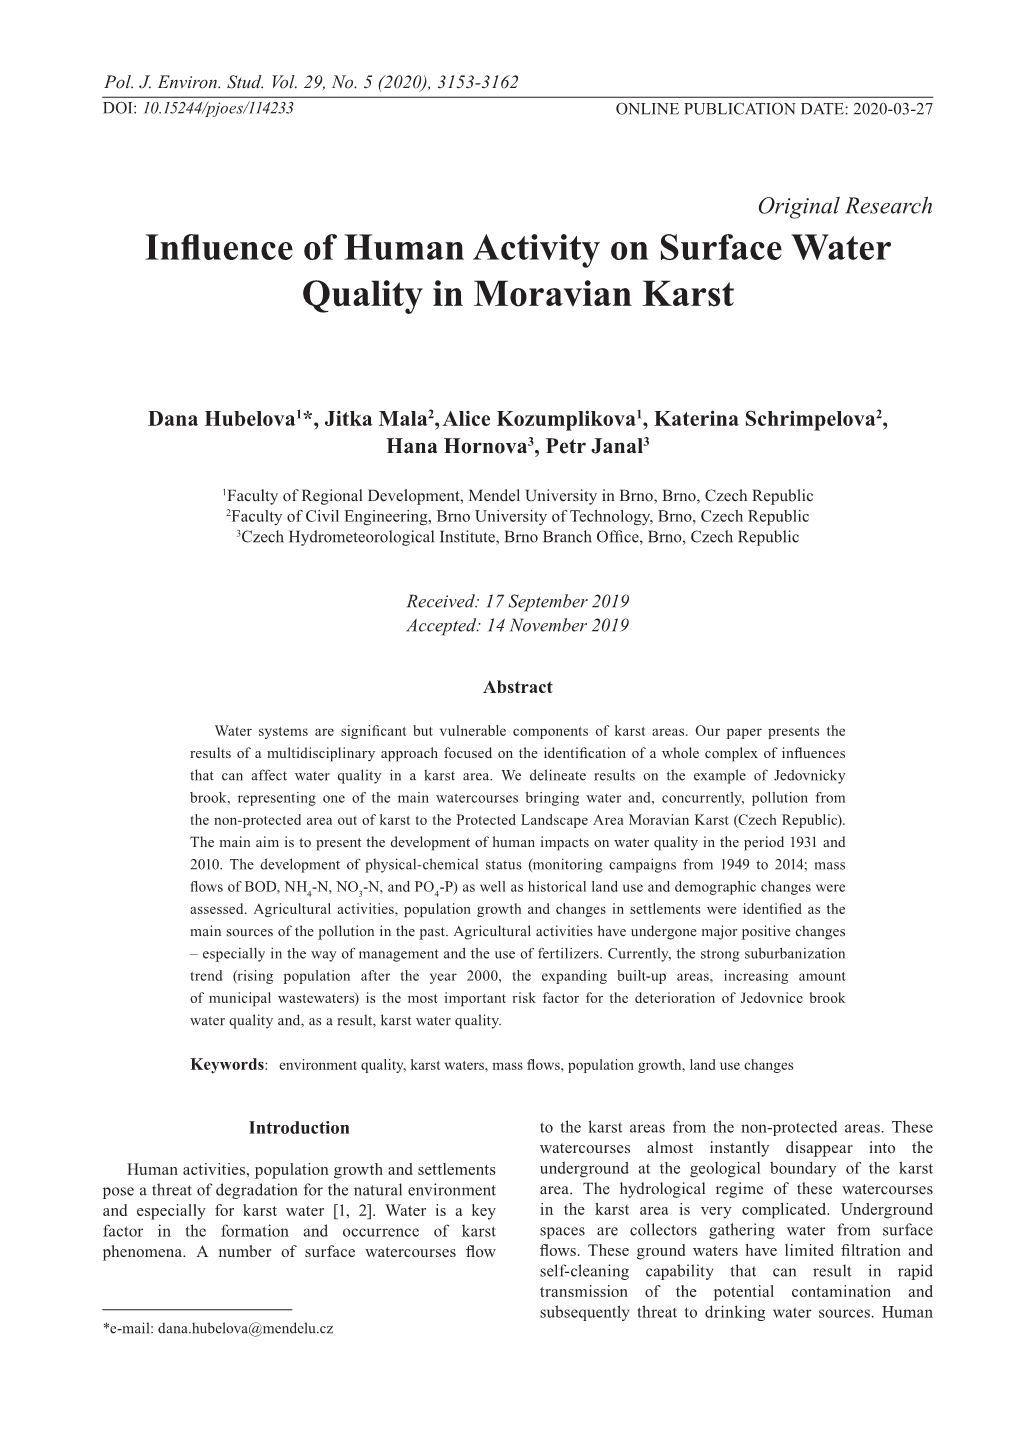 Influence of Human Activity on Surface Water Quality in Moravian Karst